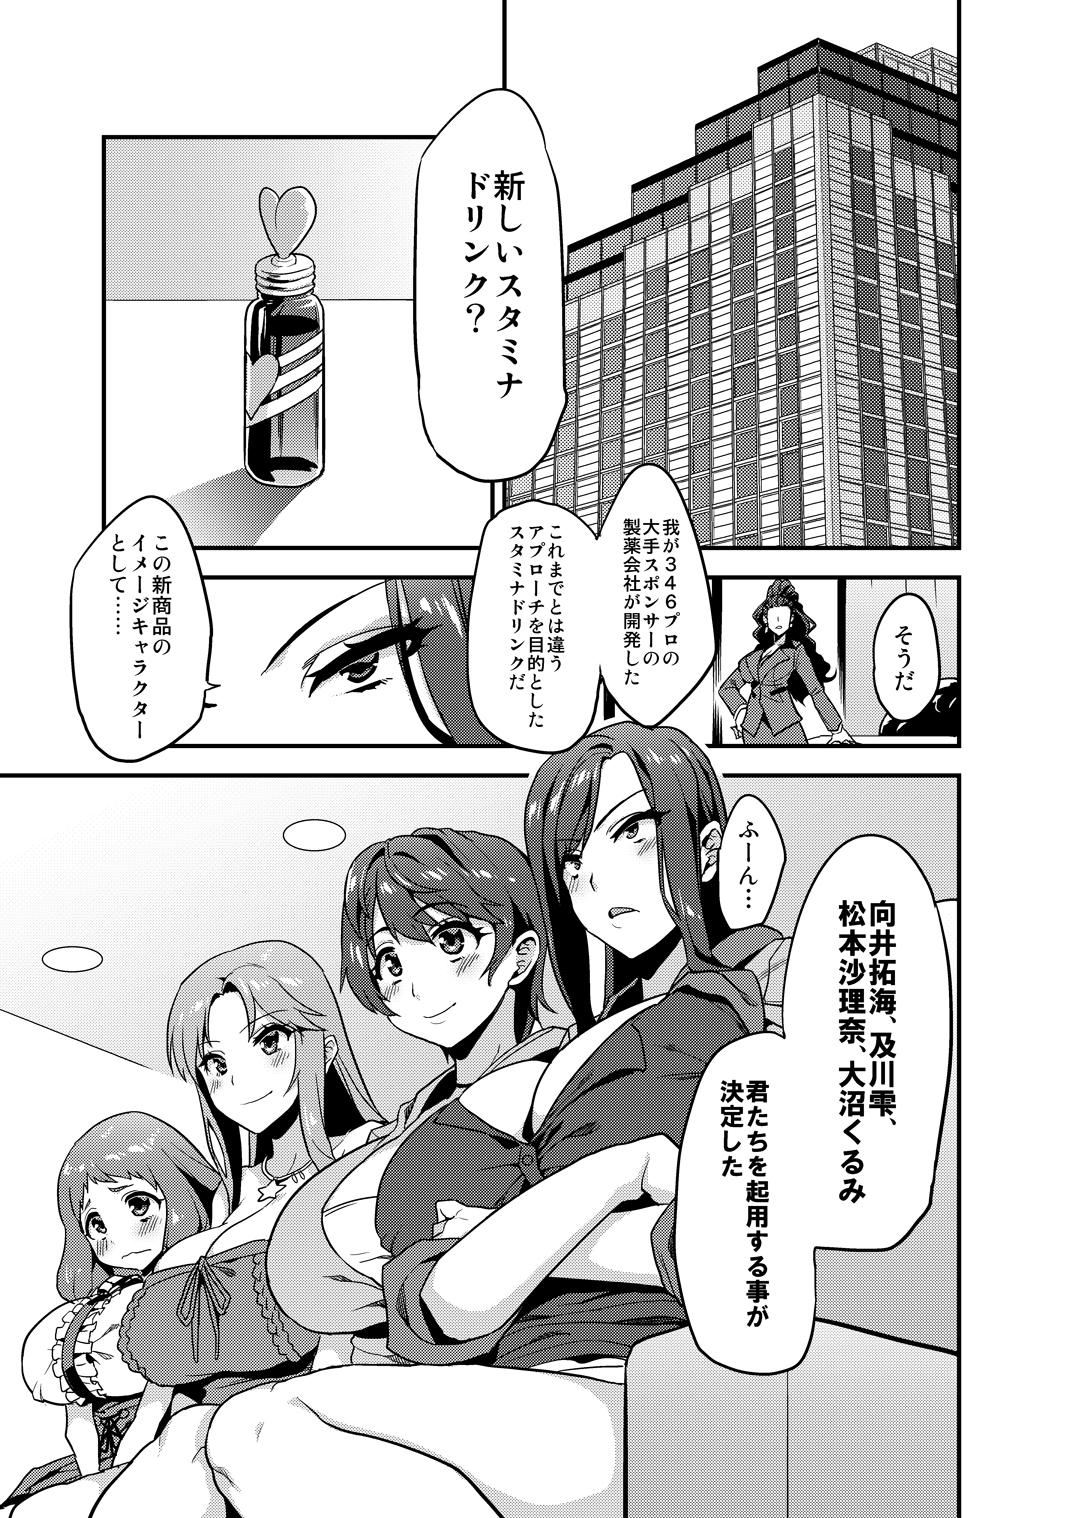 Private Hentai Idol Recycle - The idolmaster Nudity - Page 3